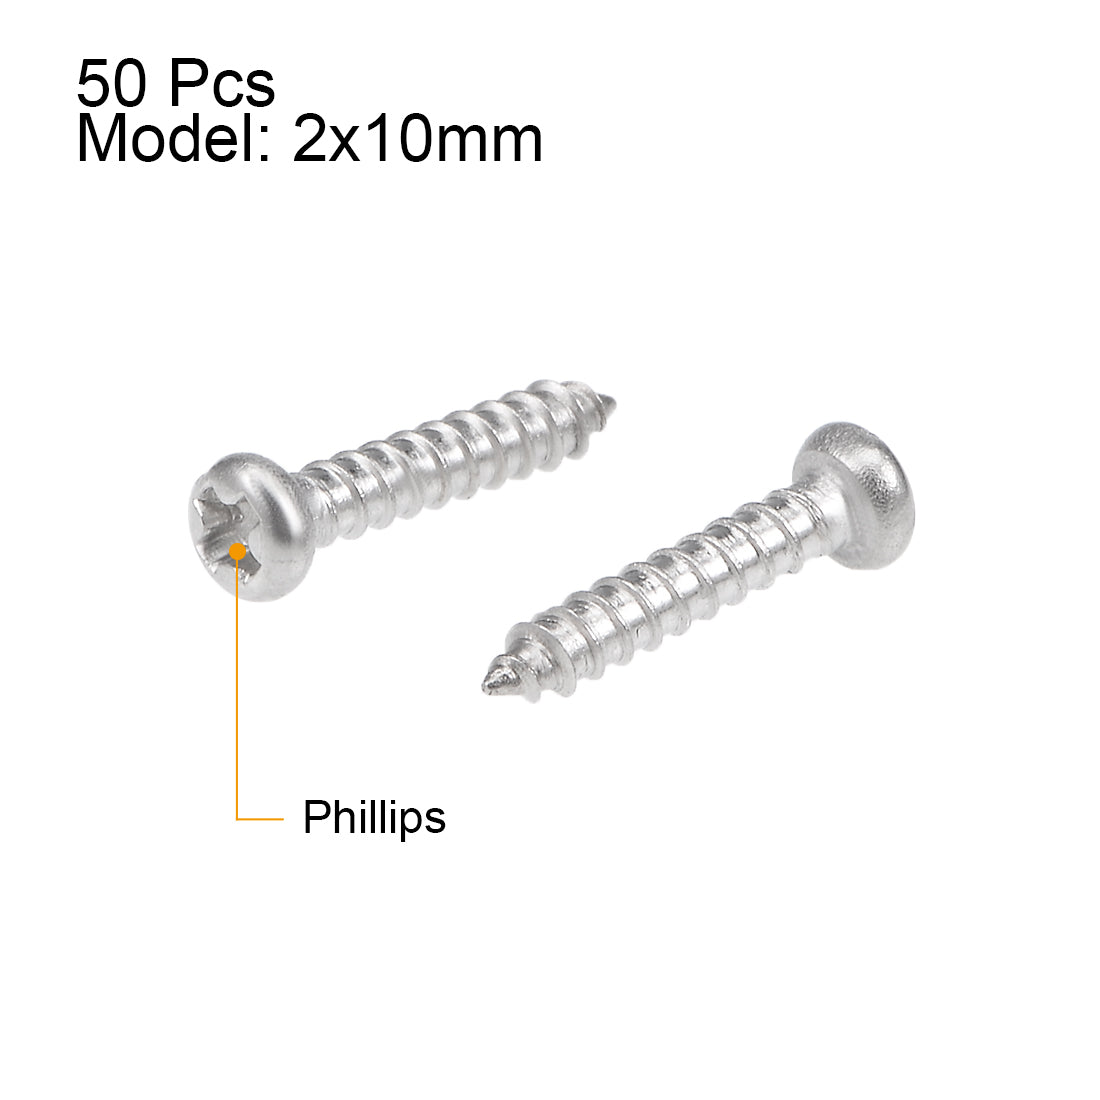 uxcell Uxcell 2x10mm Self Tapping Screws Phillips Pan Head Screw 316 Stainless Steel Fasteners Bolts 50Pcs